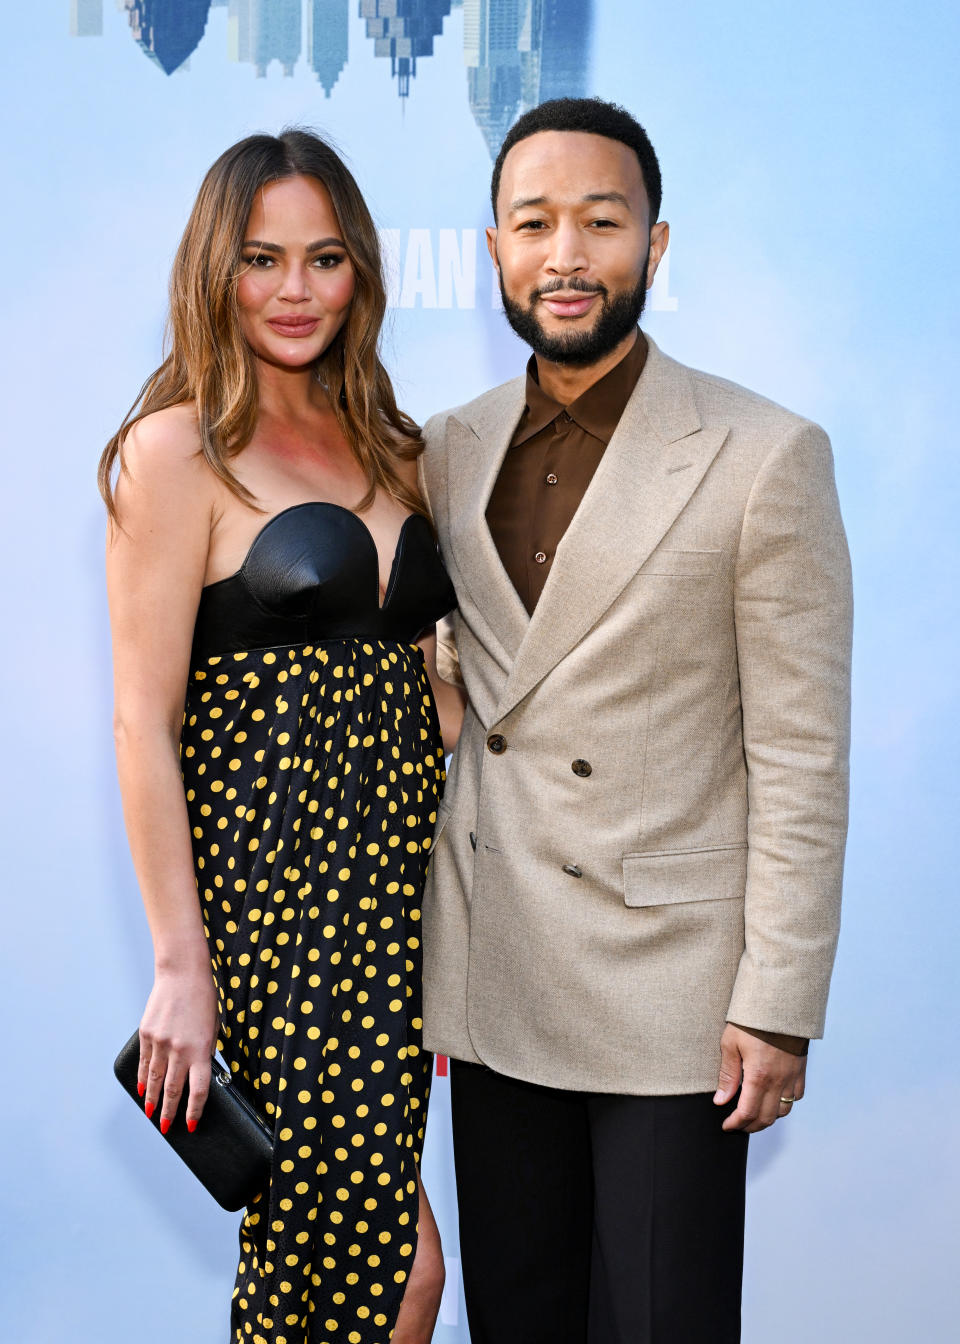 Chrissy Teigen and John Legend at the special screening event for Netflix's "A Man in Full" held at the Tudum Theater on April 24, 2024 in Los Angeles, California.